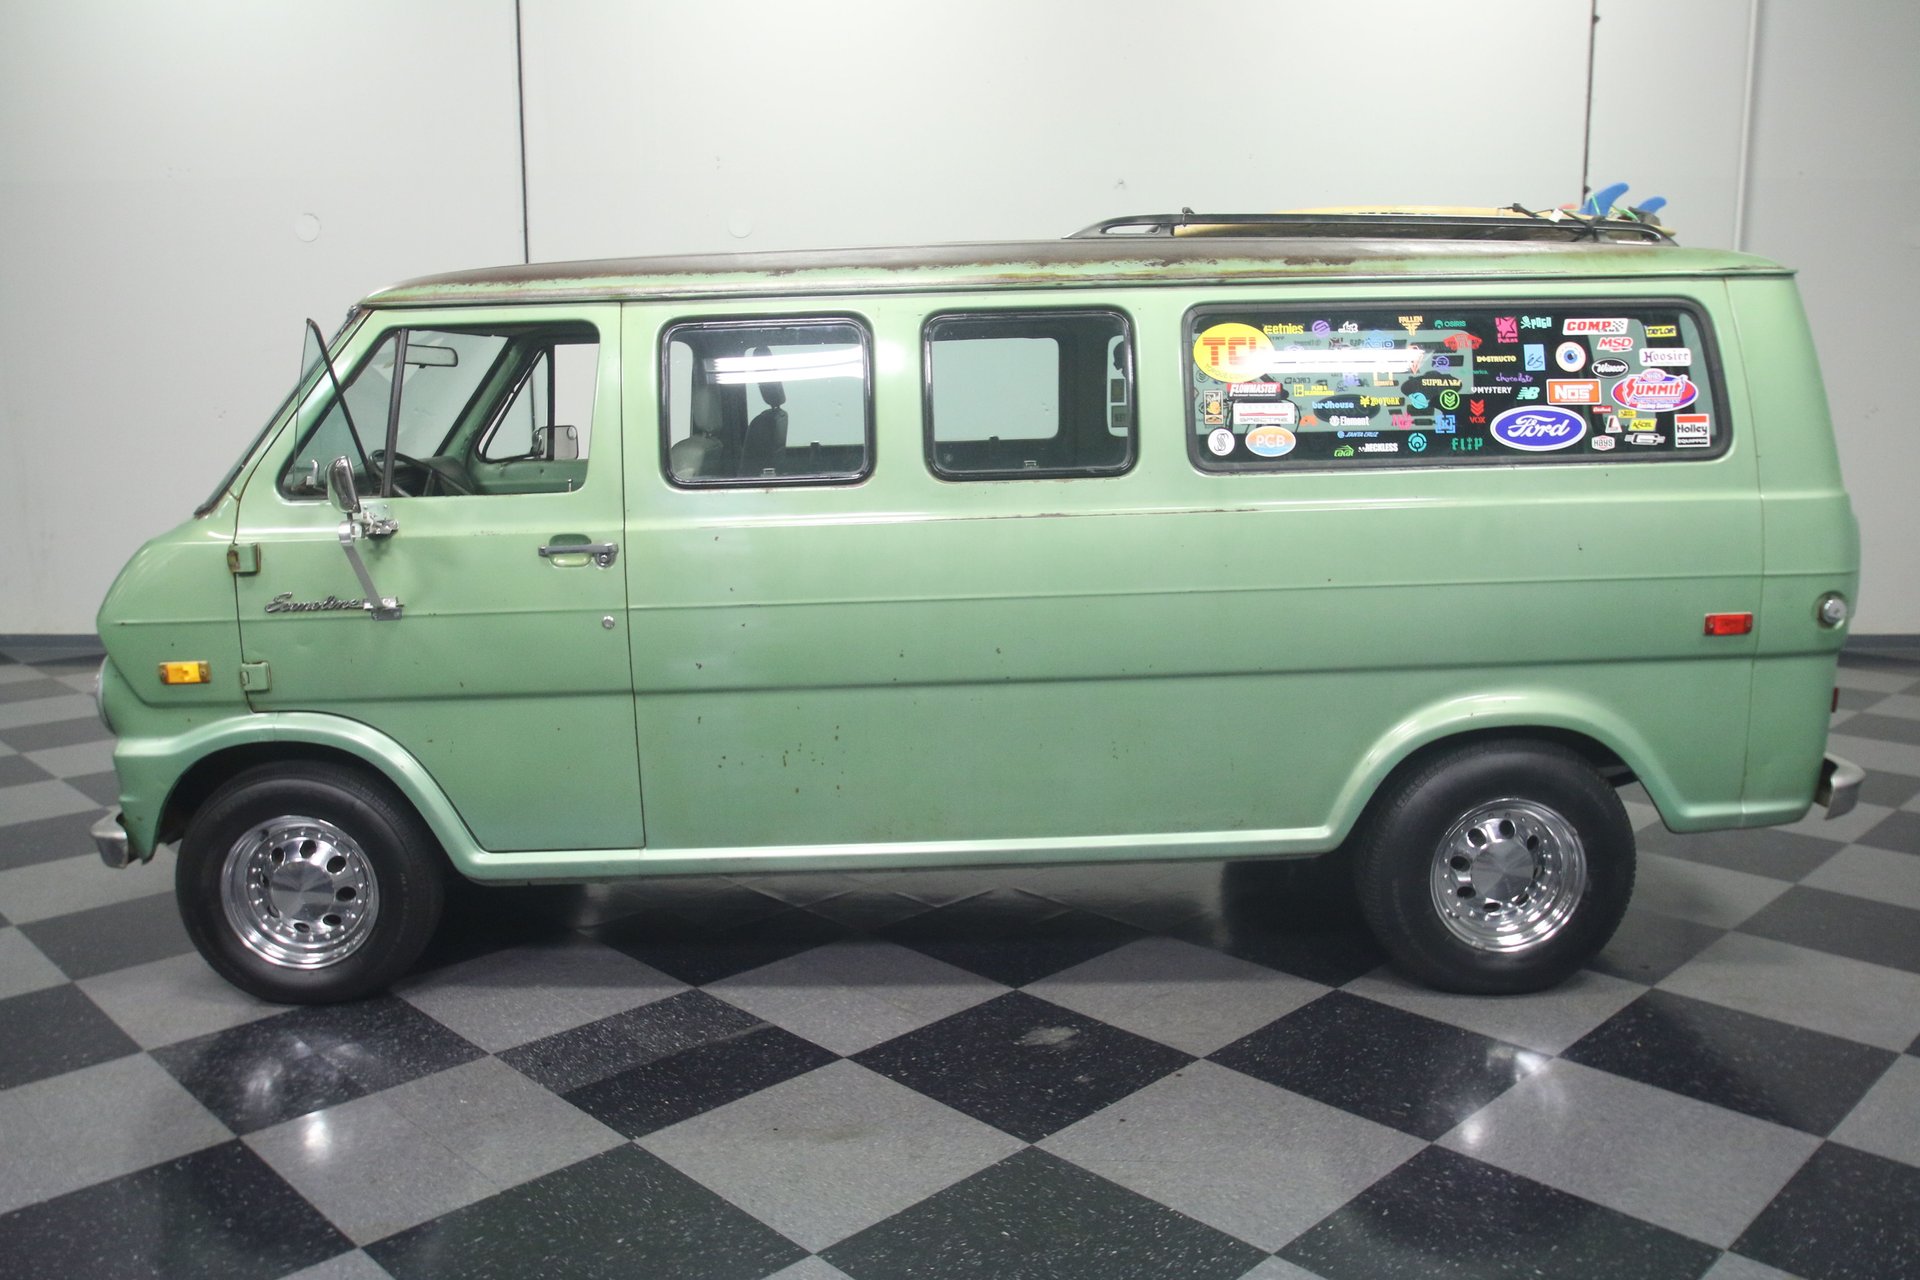 1974 ford econoline for sale